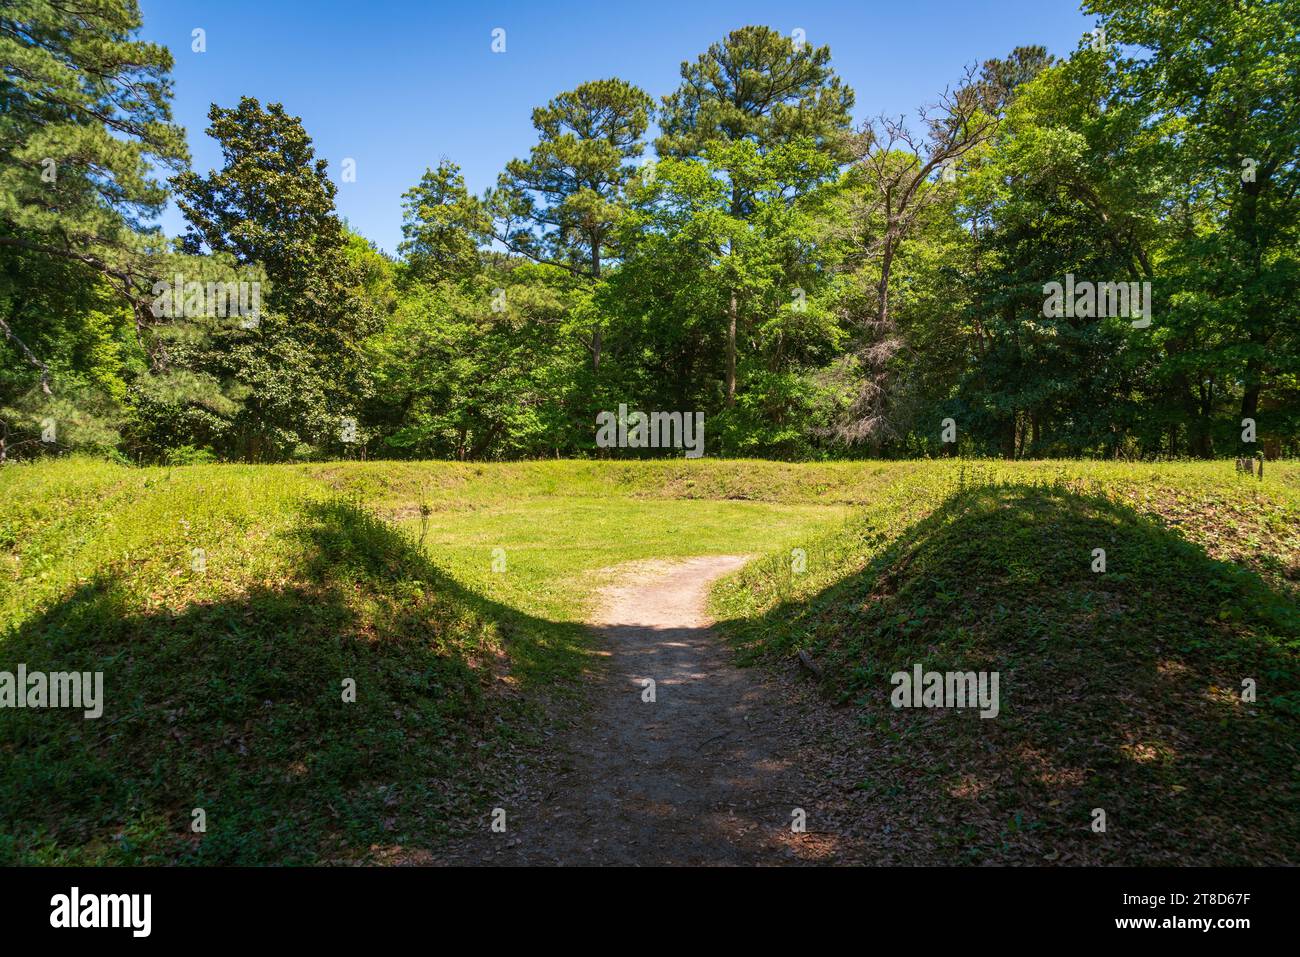 The First English Settlement in the United States, Fort Raleigh National Historic Site in North Carolina Stock Photo